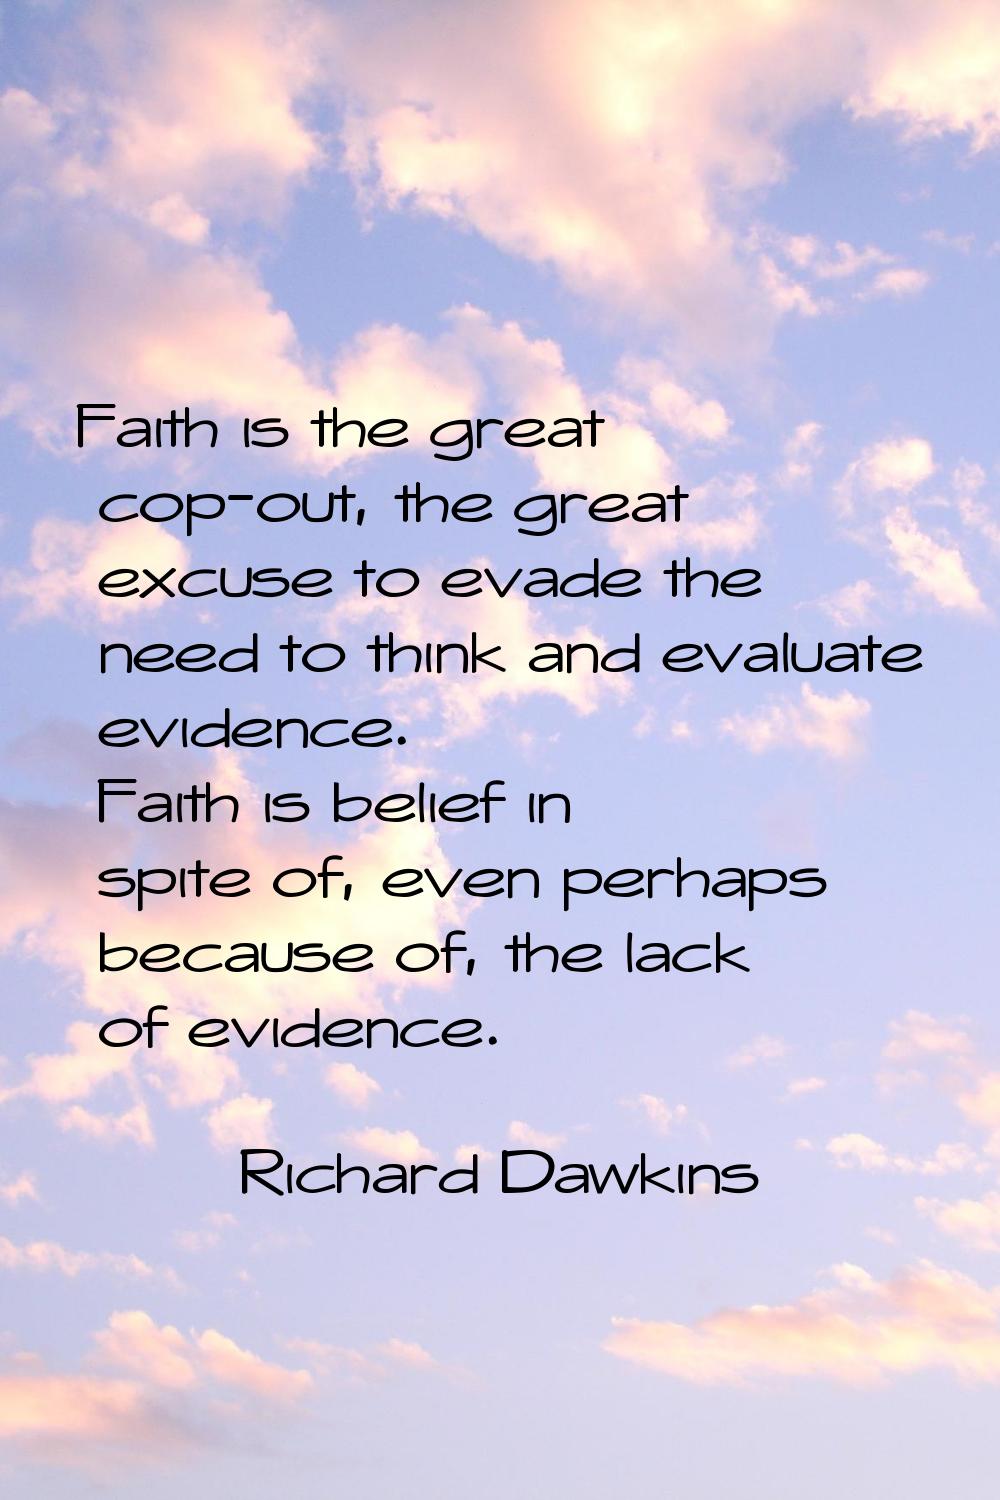 Faith is the great cop-out, the great excuse to evade the need to think and evaluate evidence. Fait